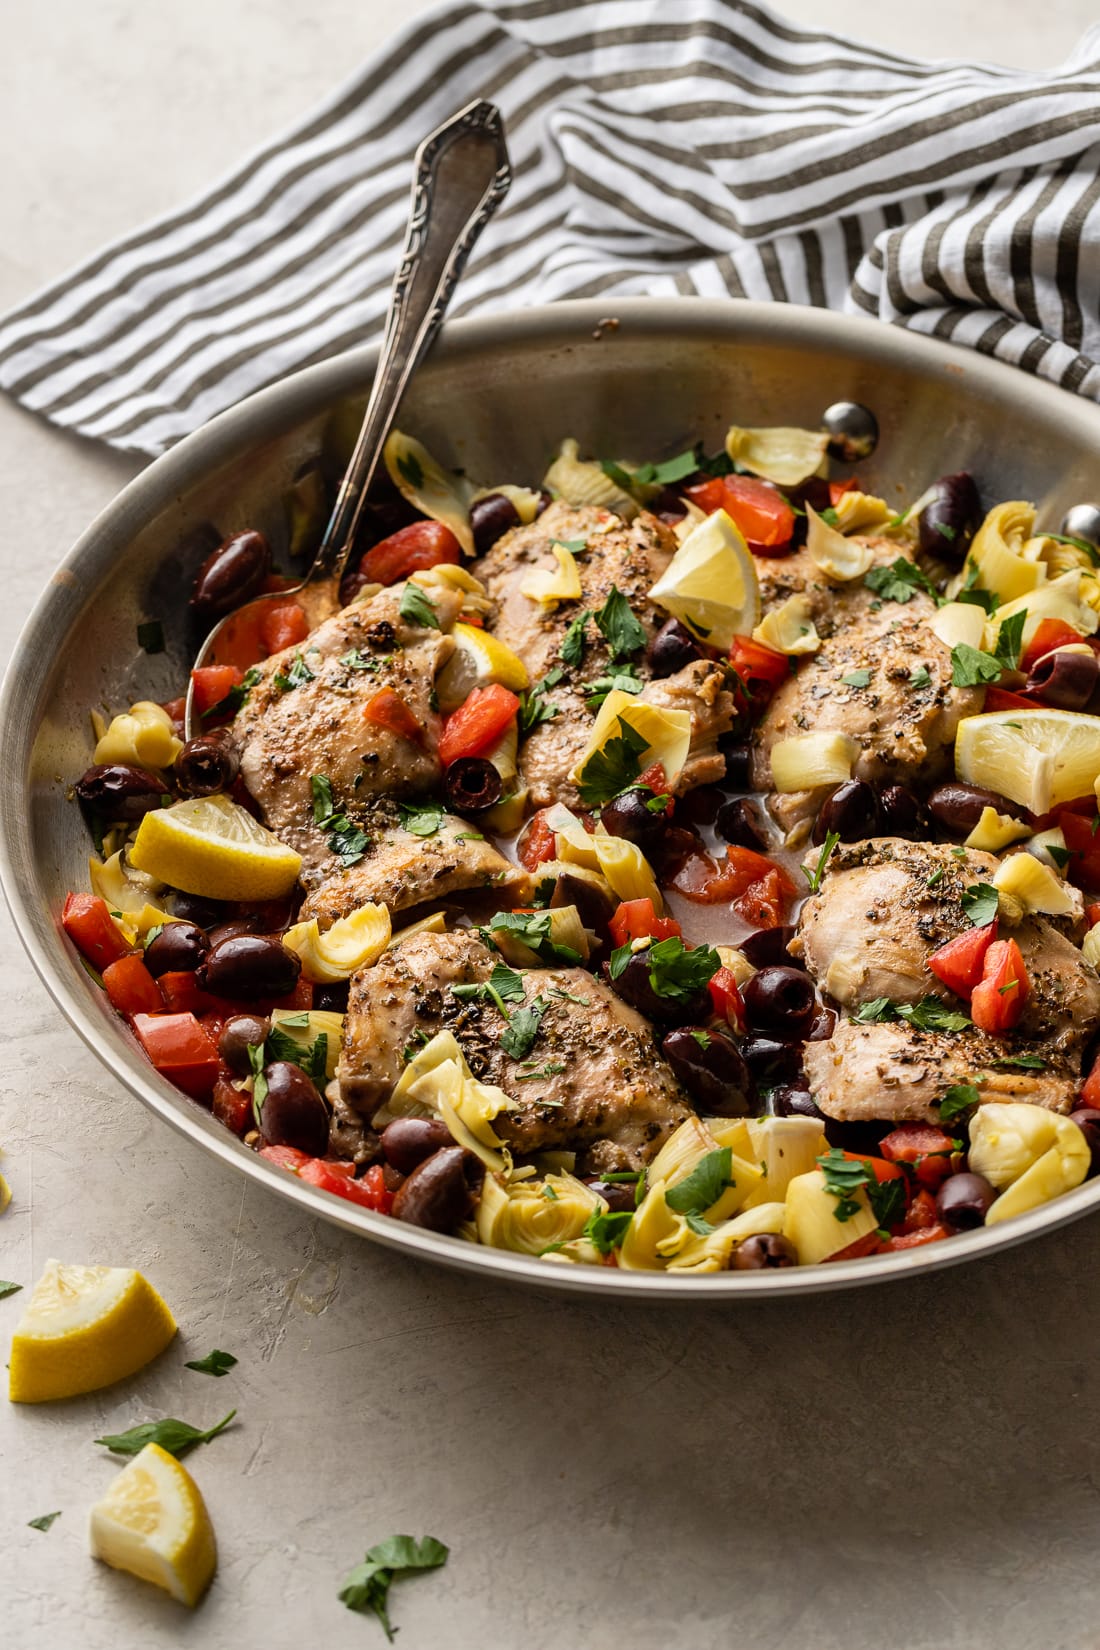 Skillet filled with Greek chicken with olives, tomatoes, and artichokes.